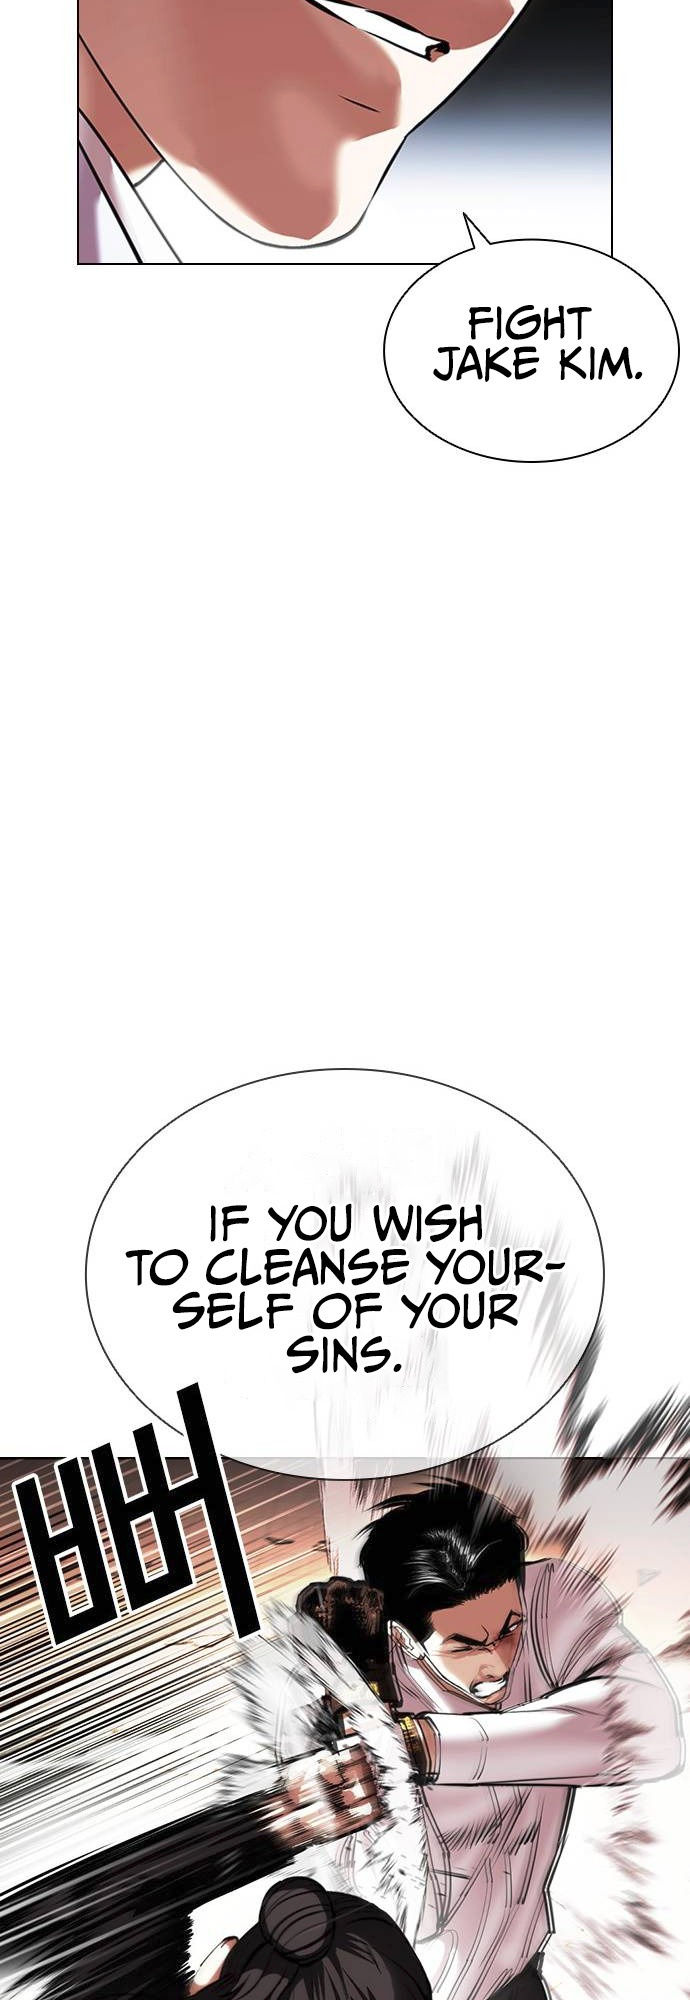 Lookism Chapter 415 image 017